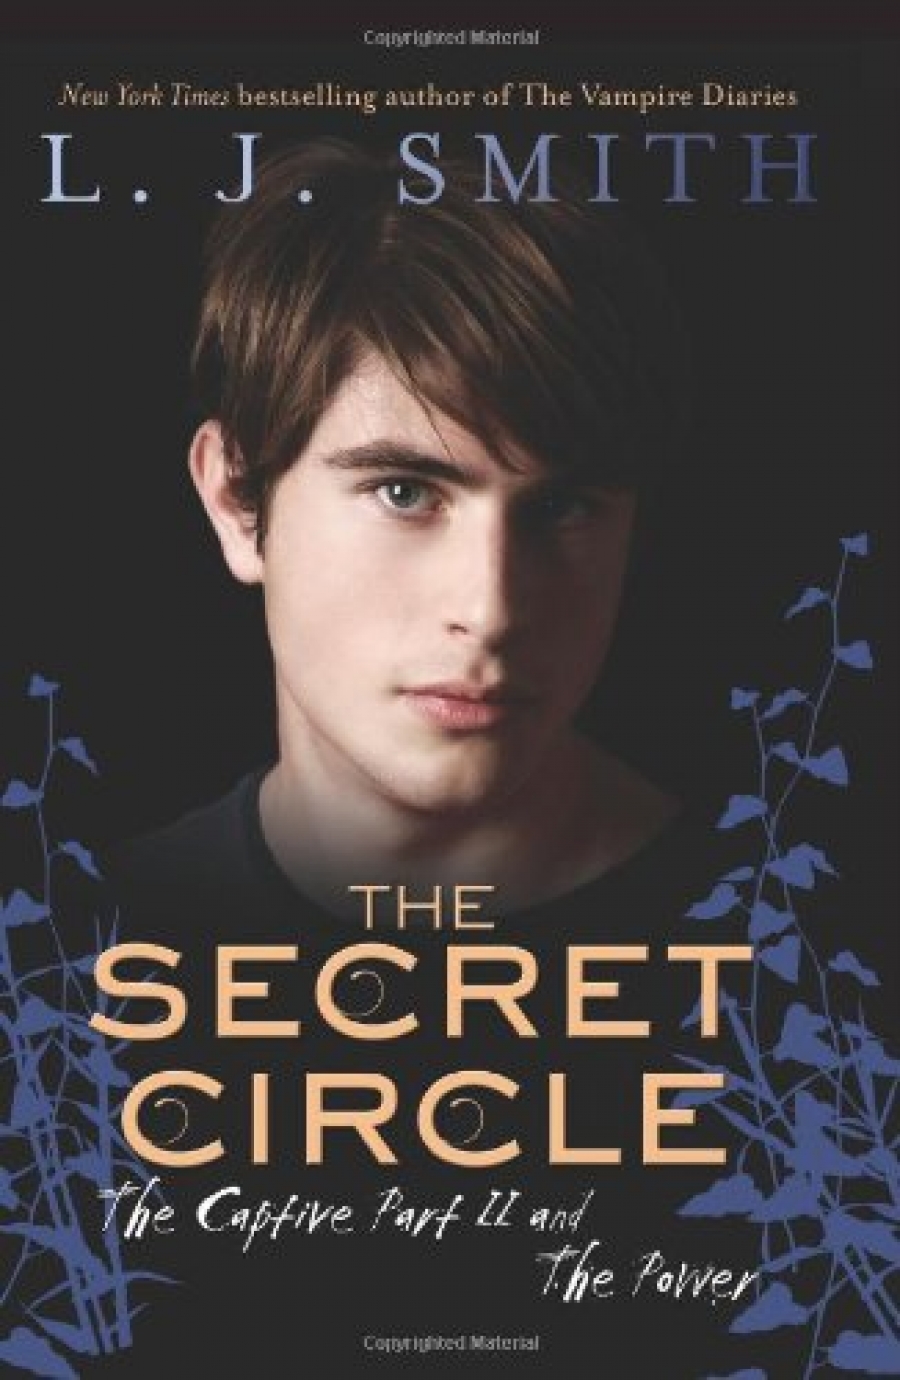 Smith, L.J. The Secret Circle: The Captive Part II and the Power 